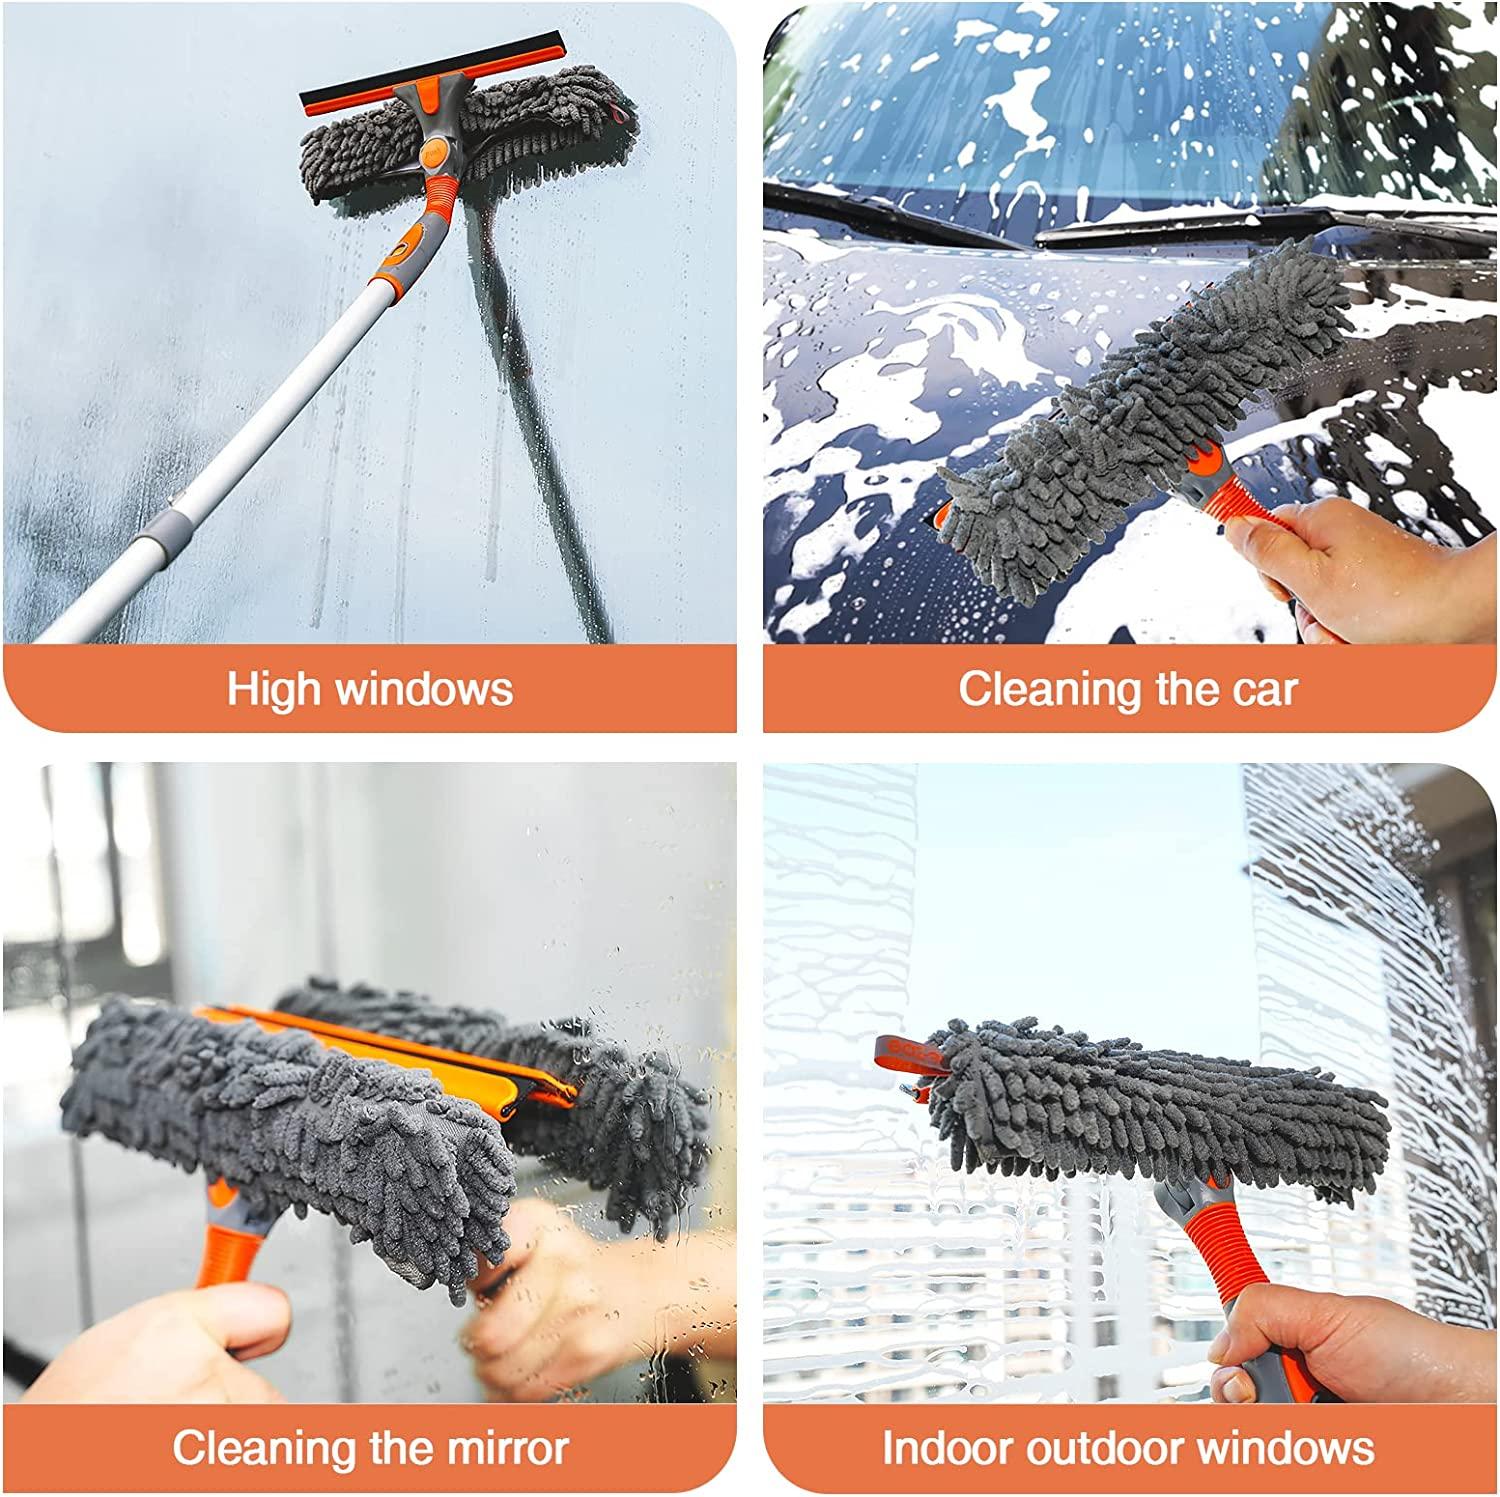 car windshield squeegee Telescopic Window Cleaner Tool Car Window Cleaning  Tool